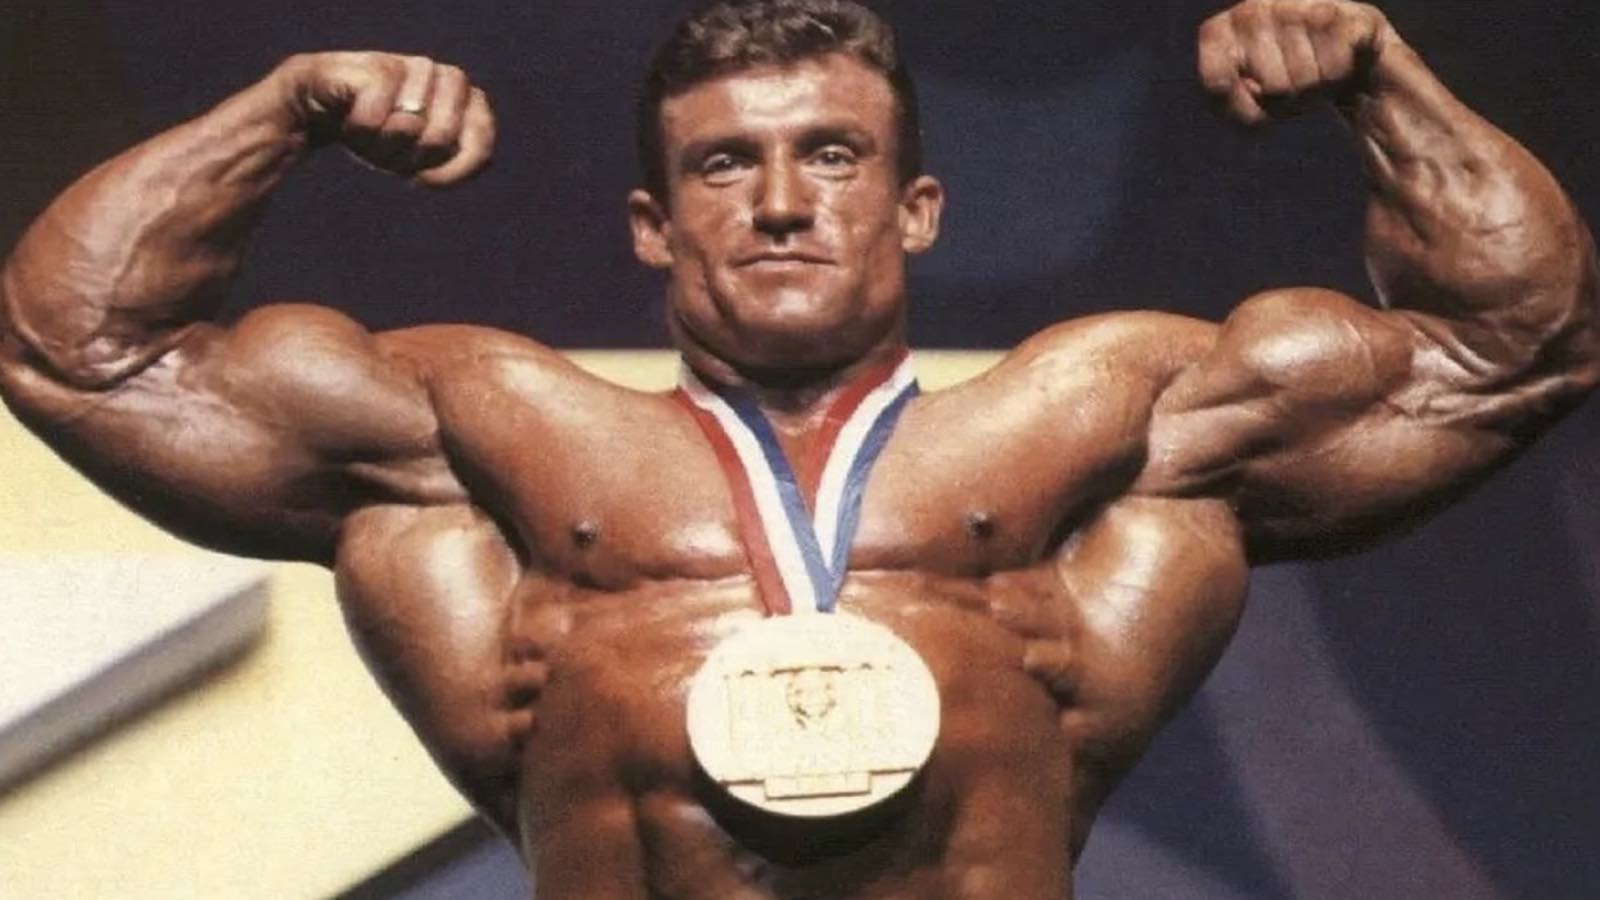 dorian-yates-explains-the-2-exercise-ab-routine-that-fueled-his-mr.-olympia-dynasty-–-breaking-muscle